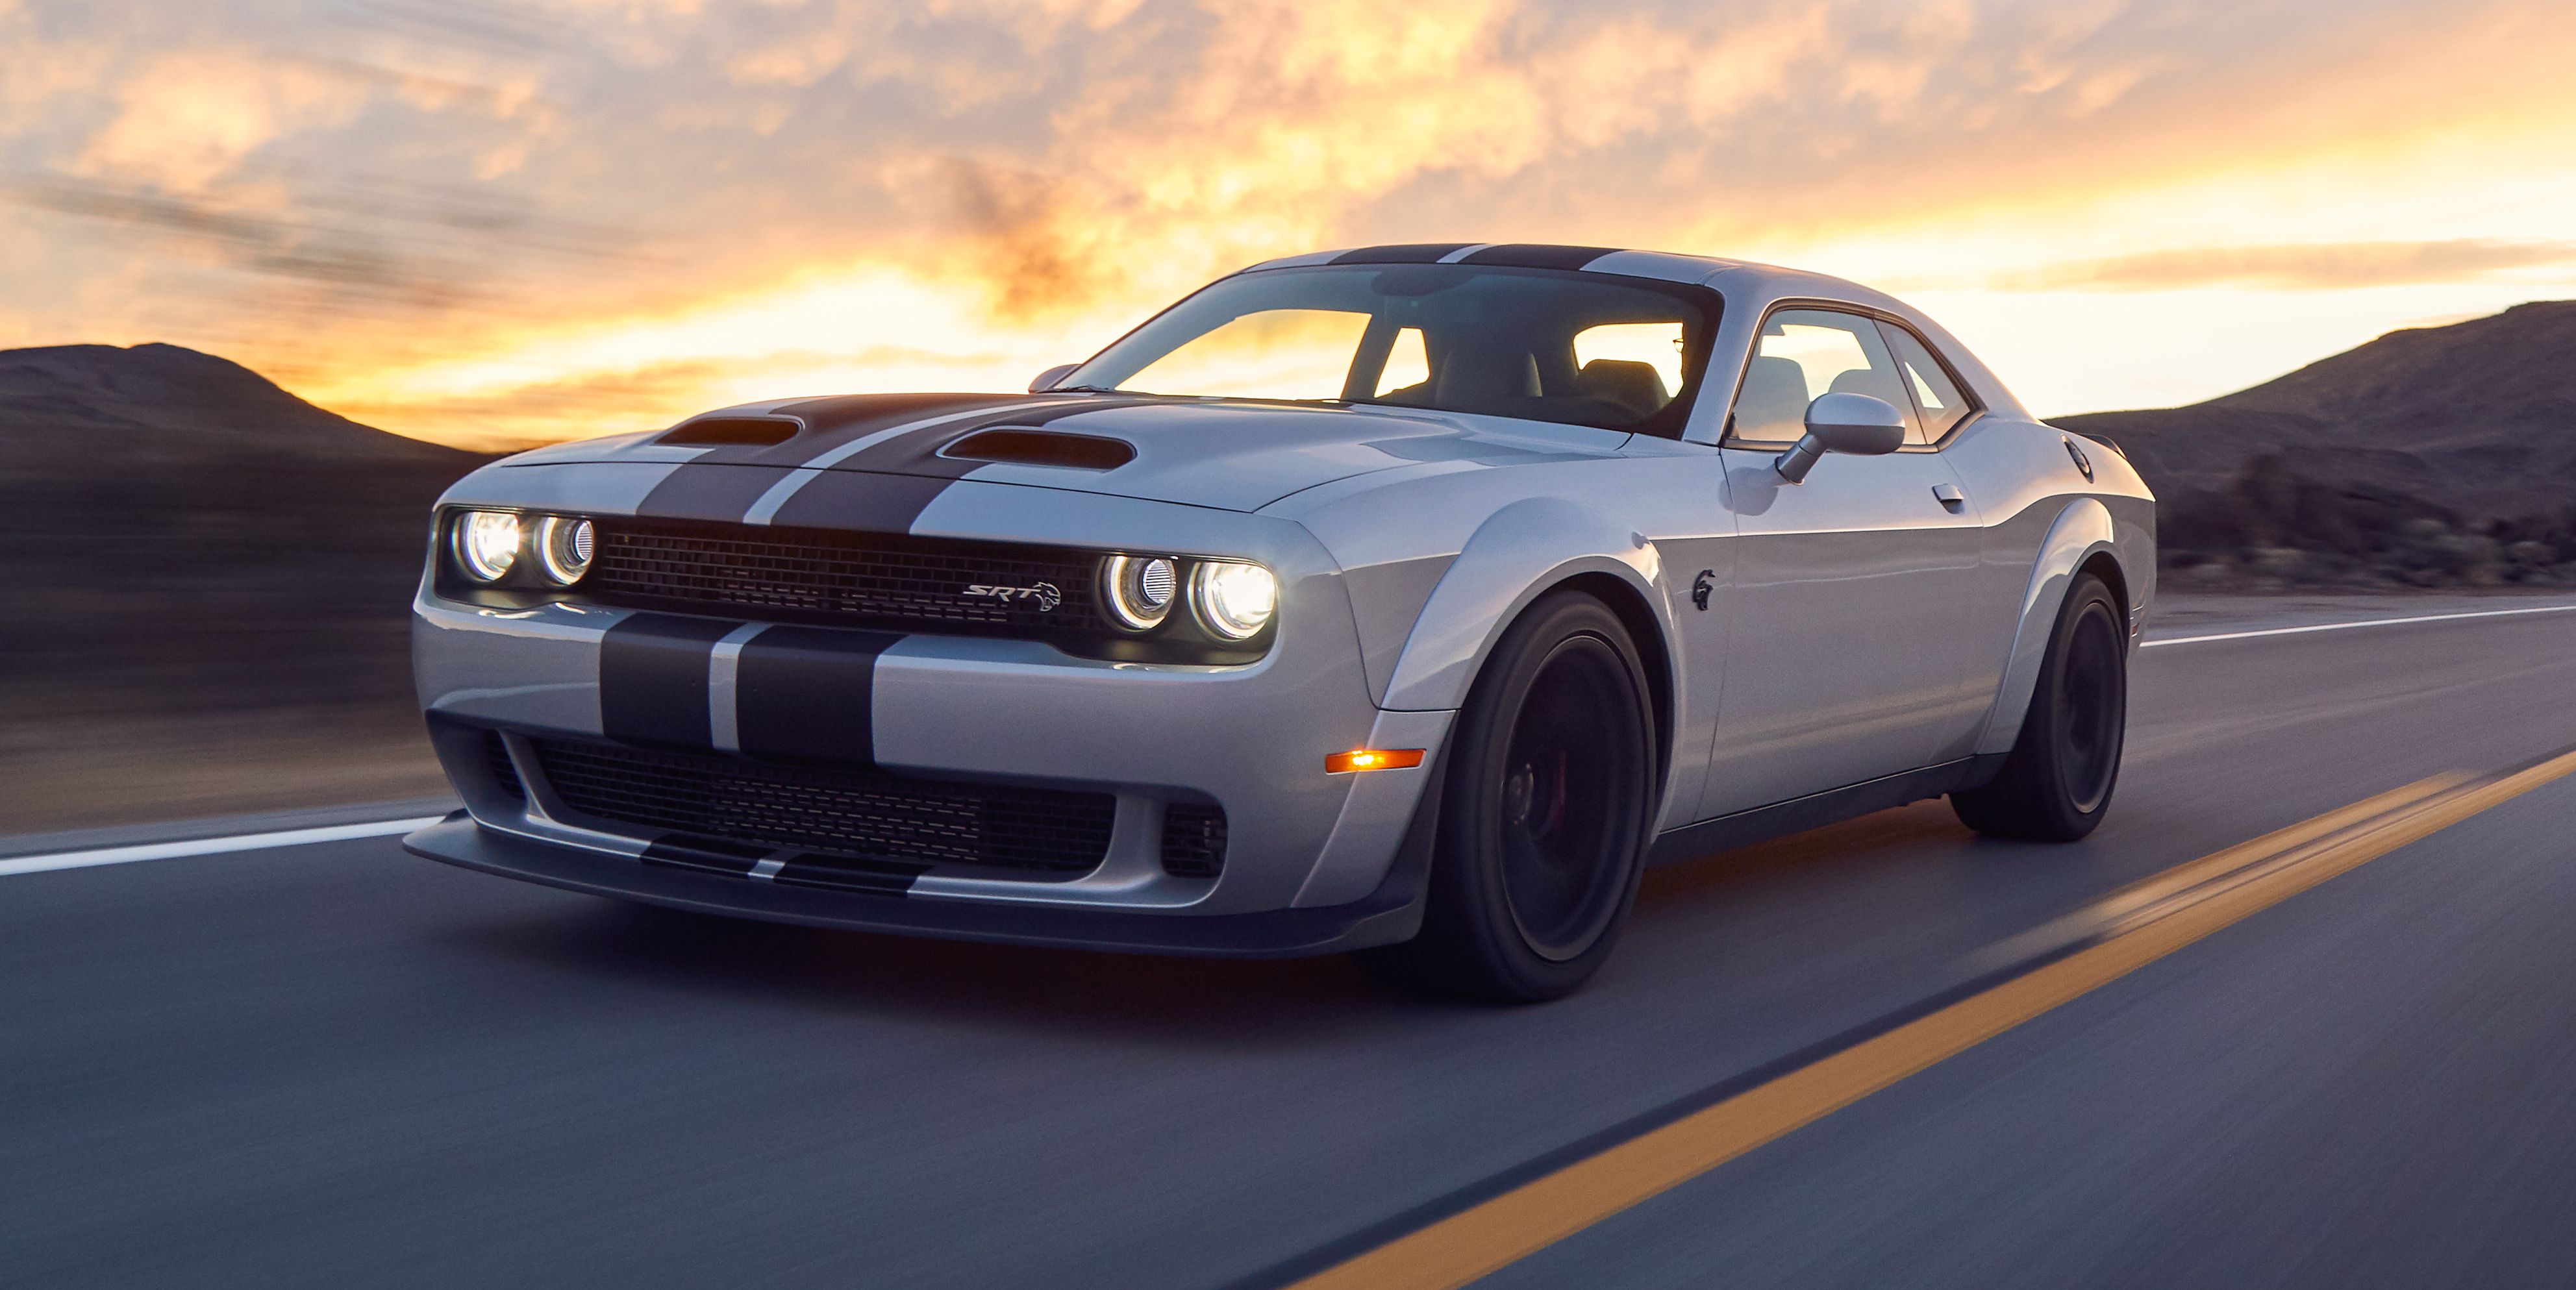 Dodge Cars, Trucks and SUVs: Latest Prices, Reviews, Specs and Photos | Autoblog